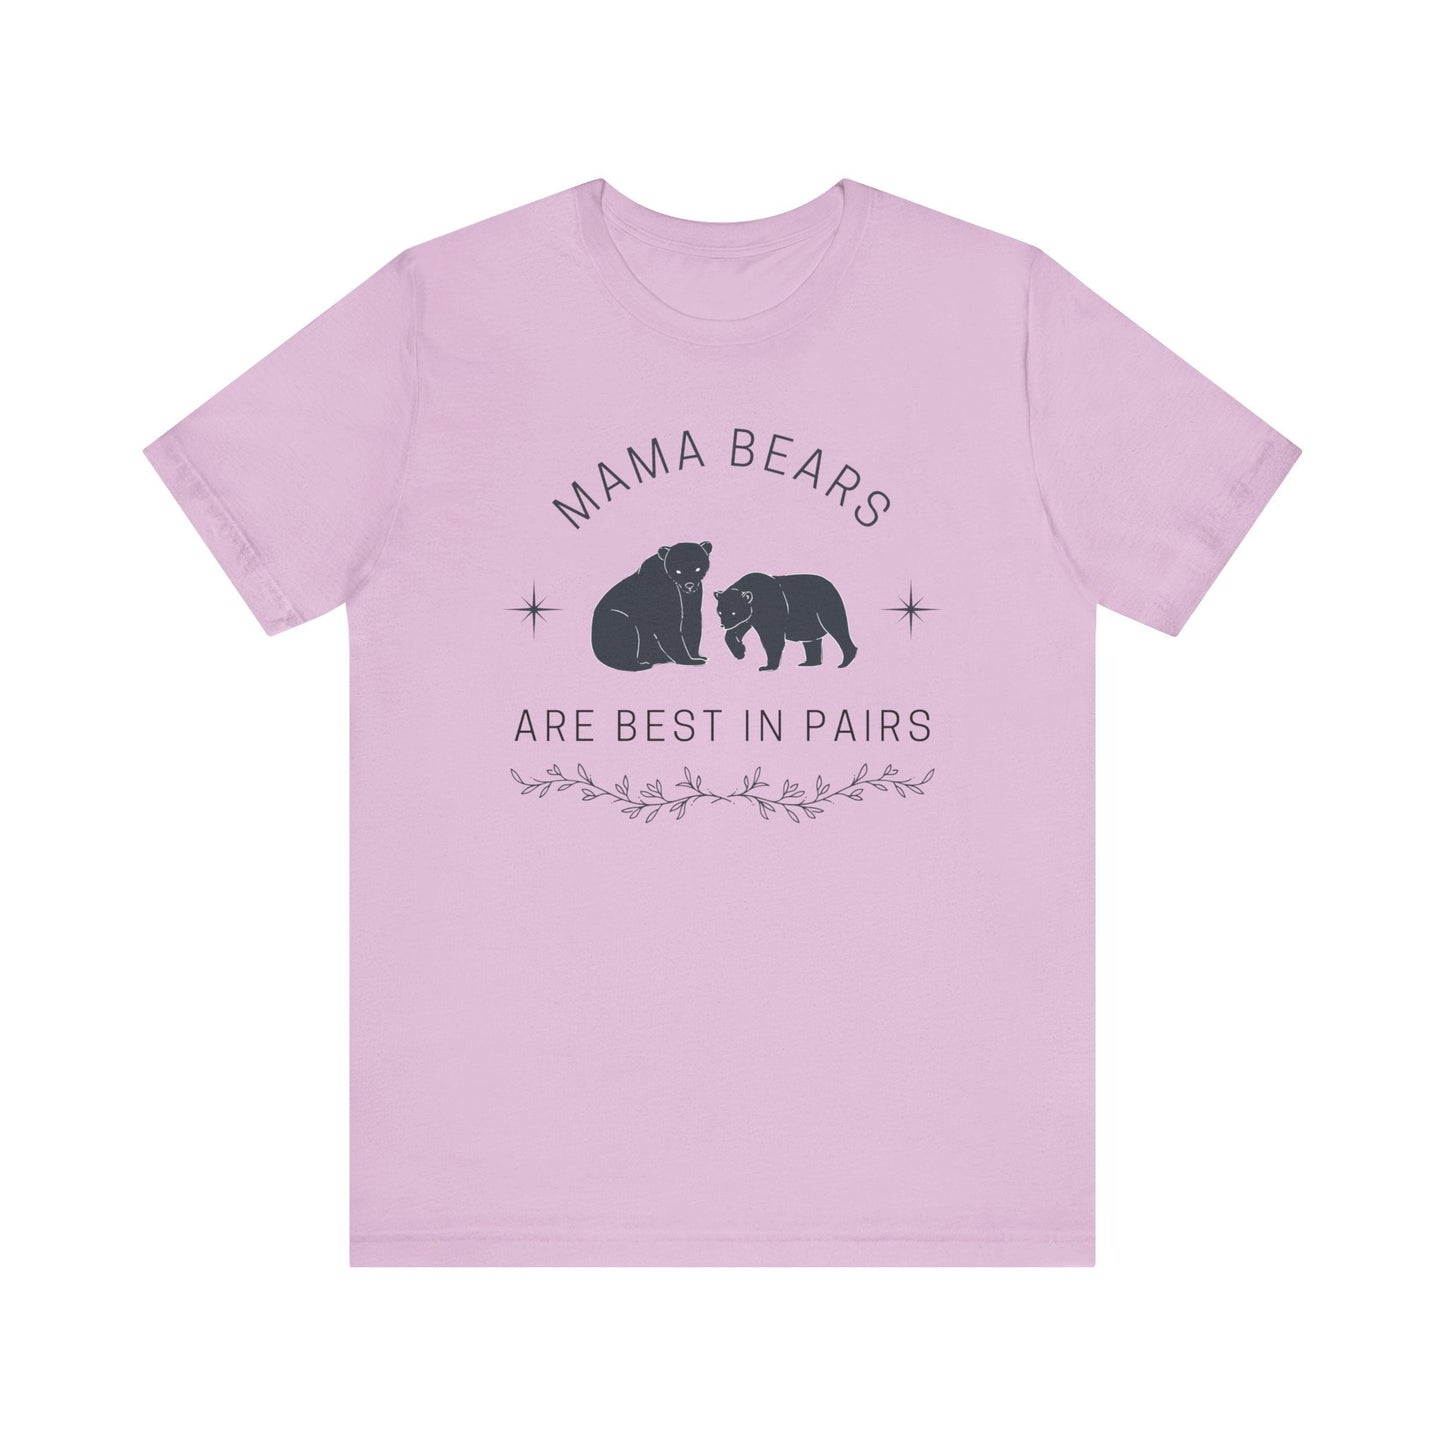 LGBT Moms "Mama Bears are Best in Pairs" Jersey Short Sleeve Tee | Mothers Day Lesbian Moms LGBTQ shirt